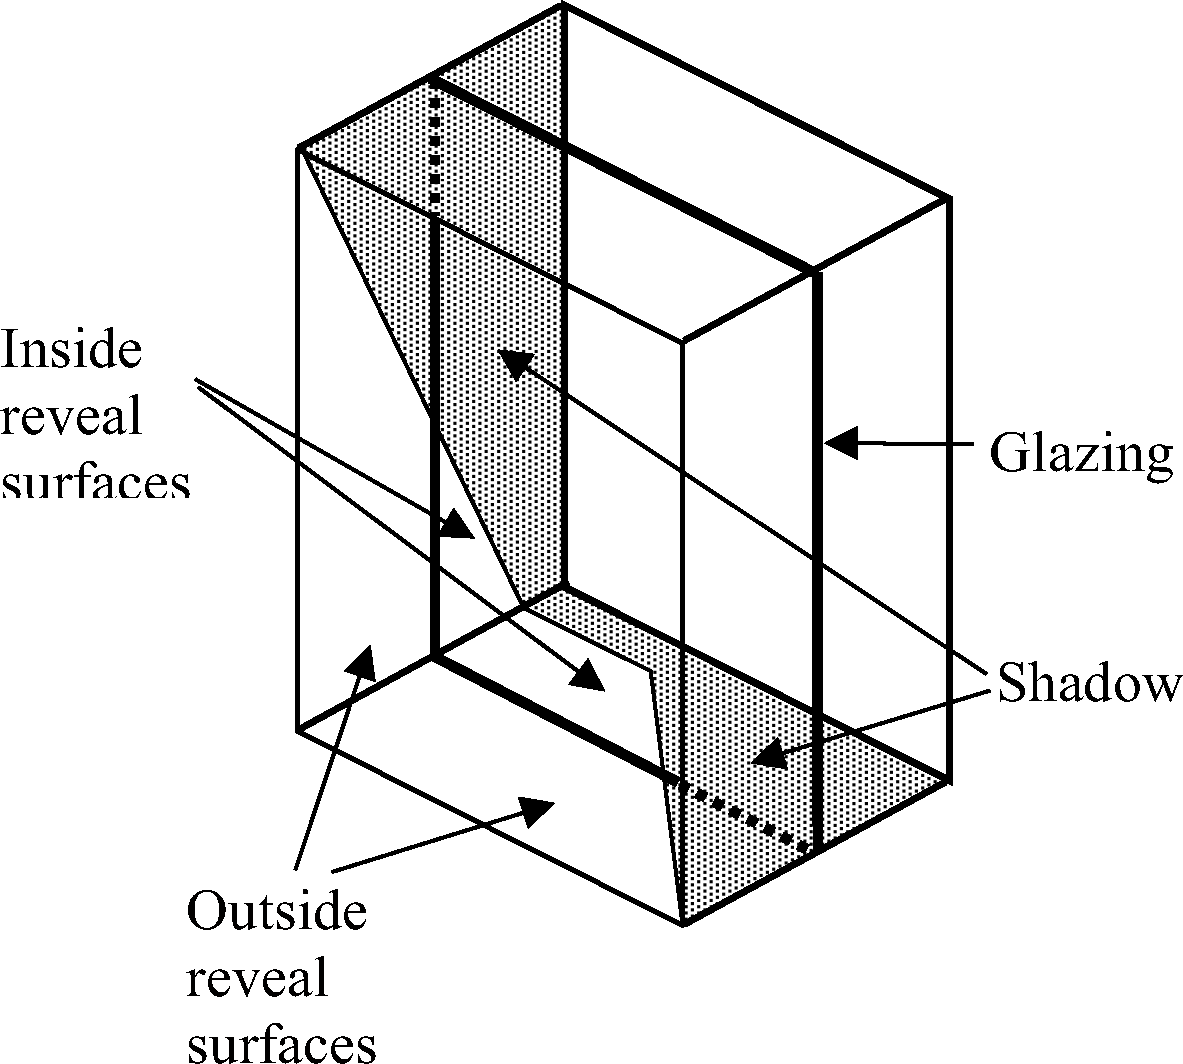 Example of shadowing of reveal surfaces by other reveal surfaces. [fig:example-of-shadowing-of-reveal-surfaces-by]